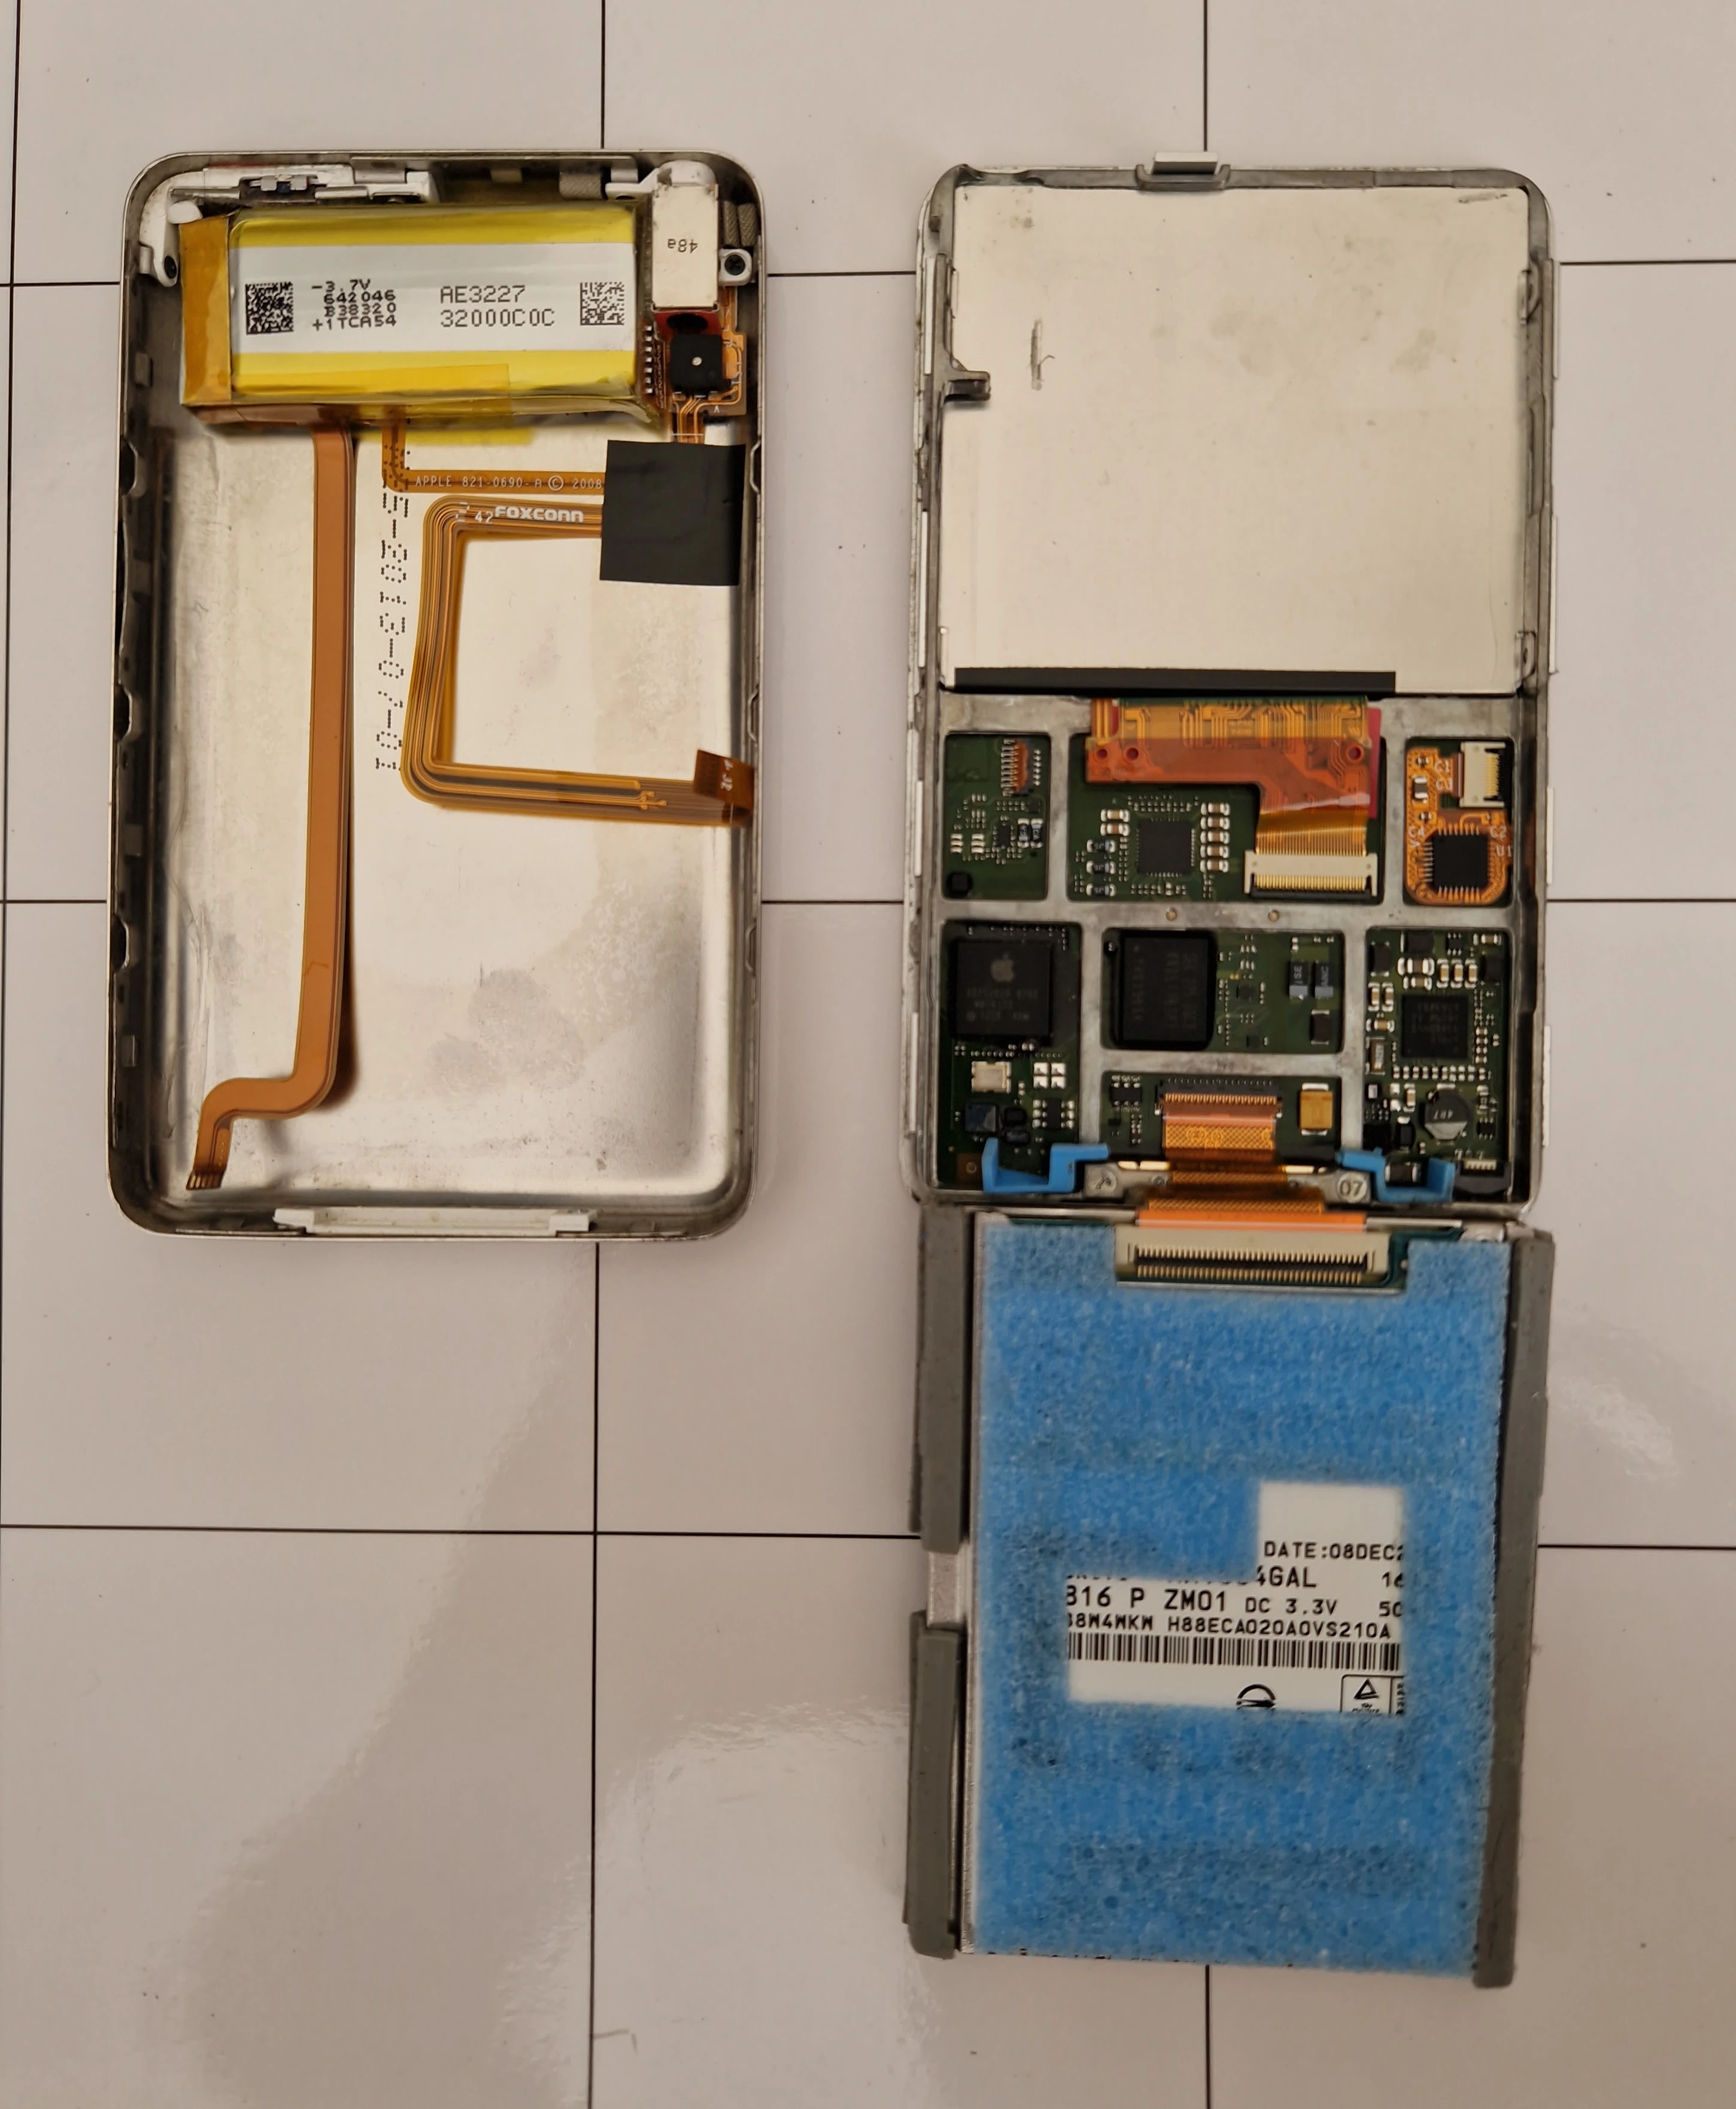 Inside of the iPod